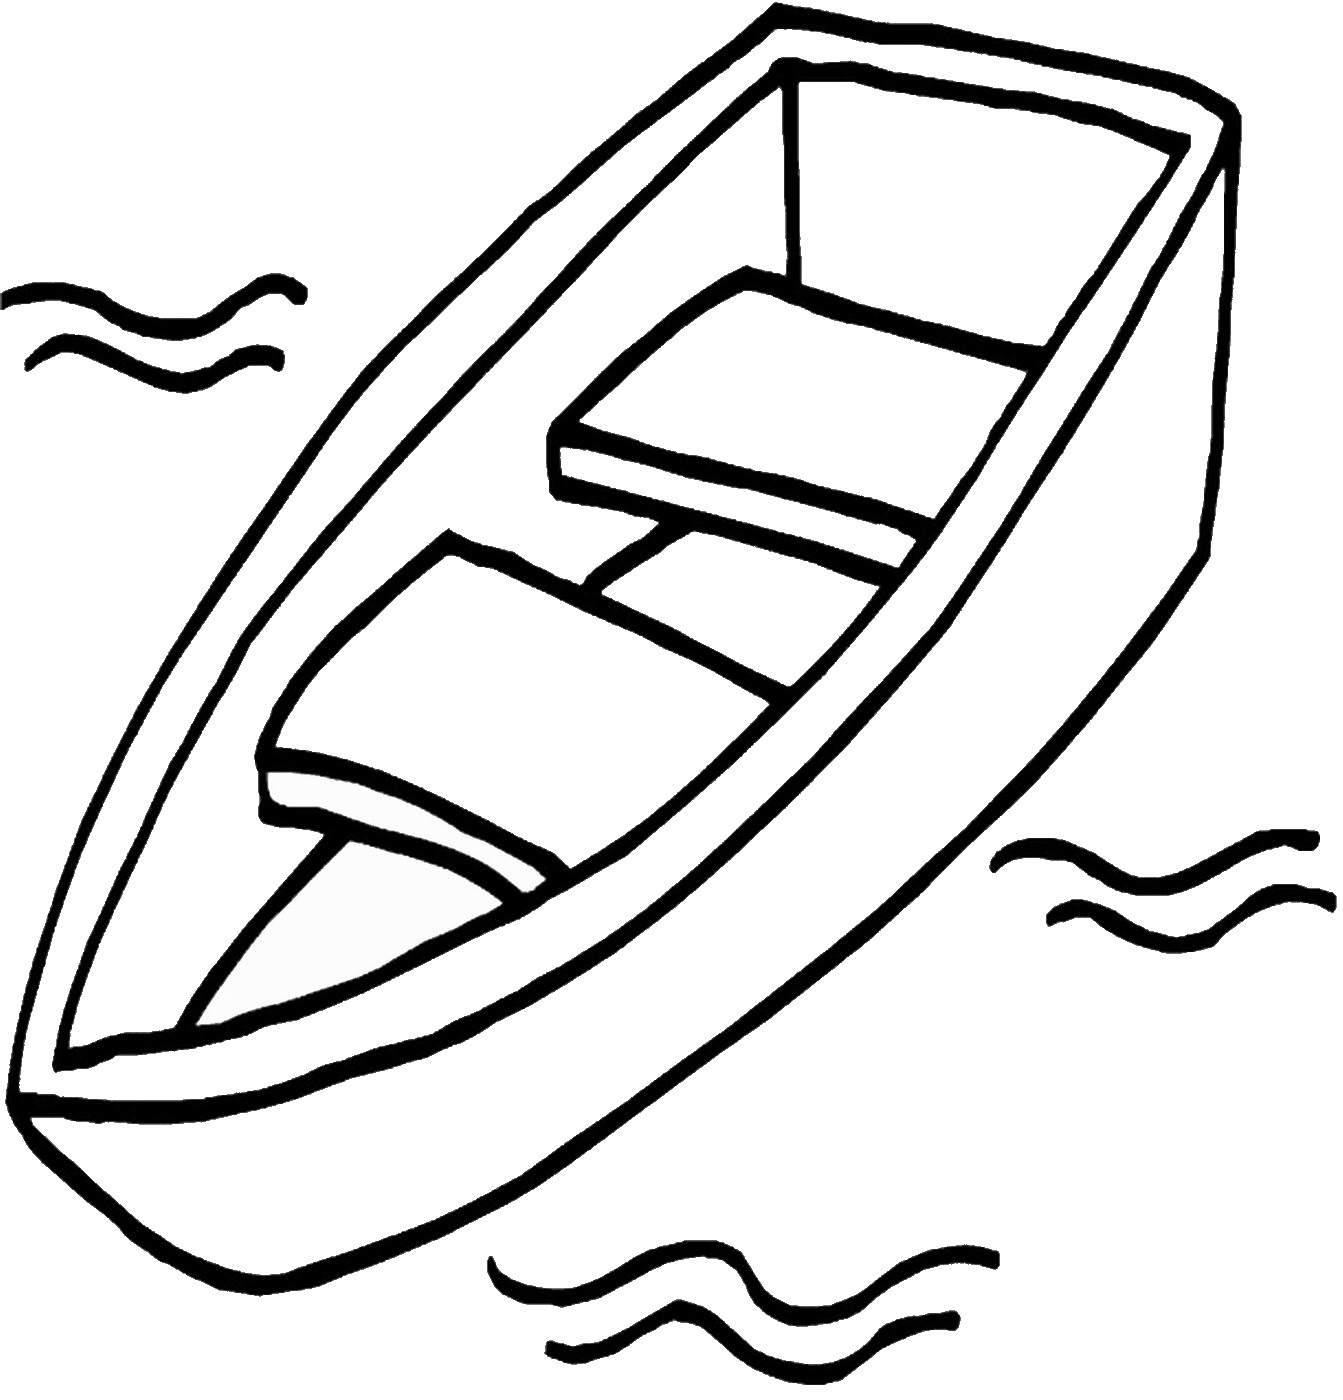 sailboat black and white coloring pages - photo #27